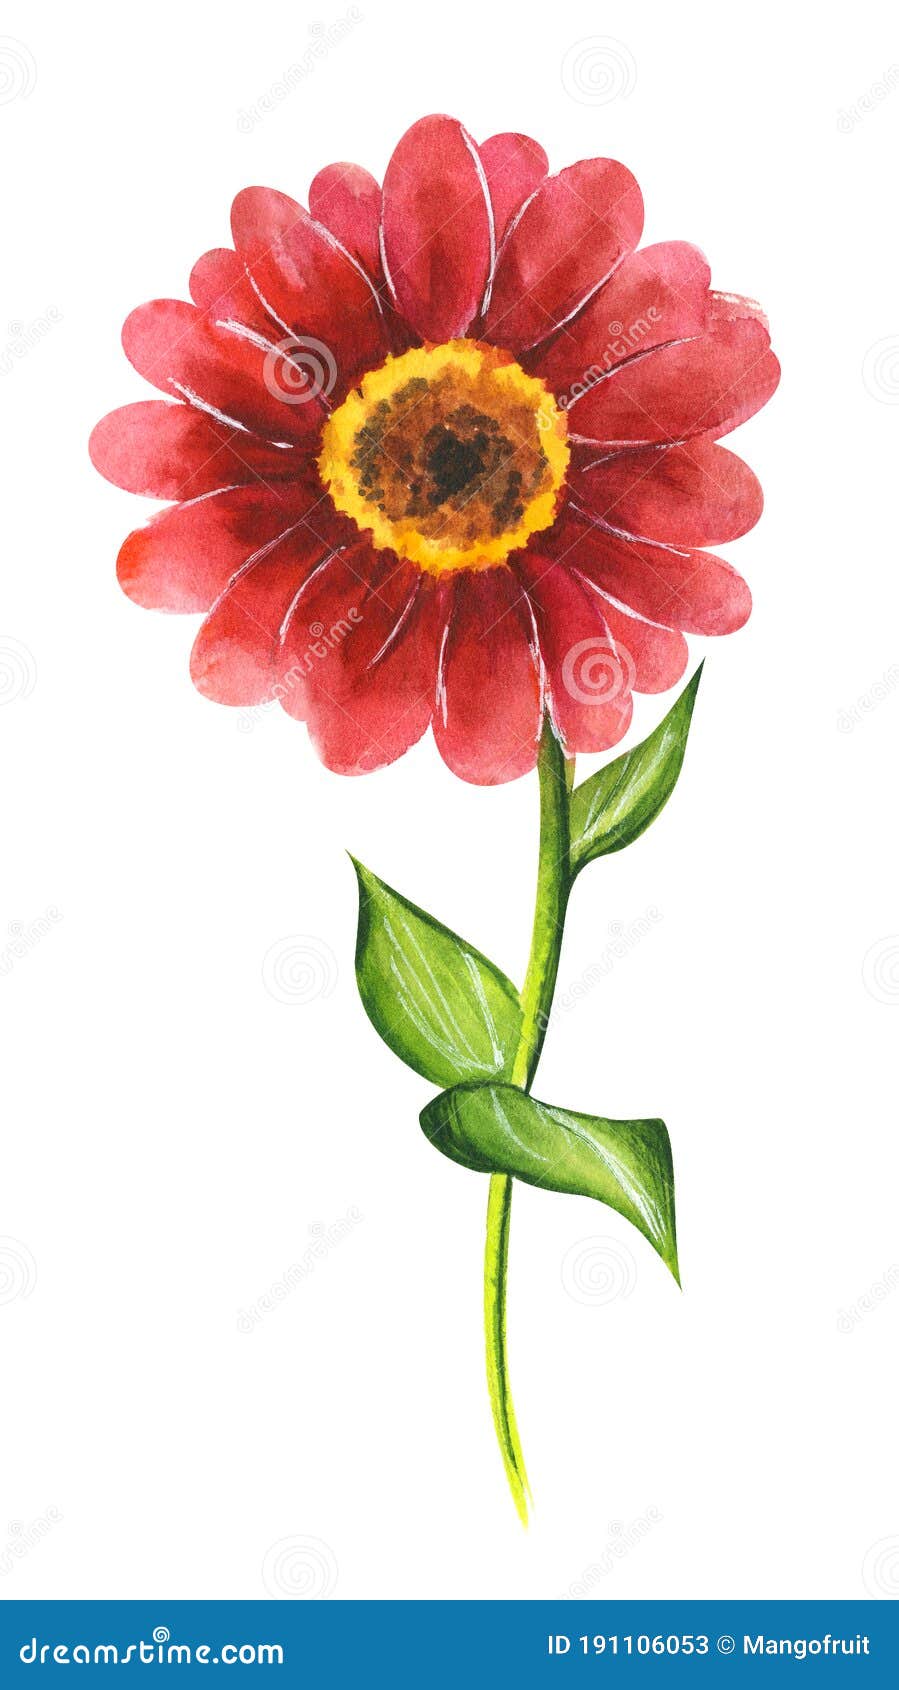  watercolor  of red zinnia flower  on white background